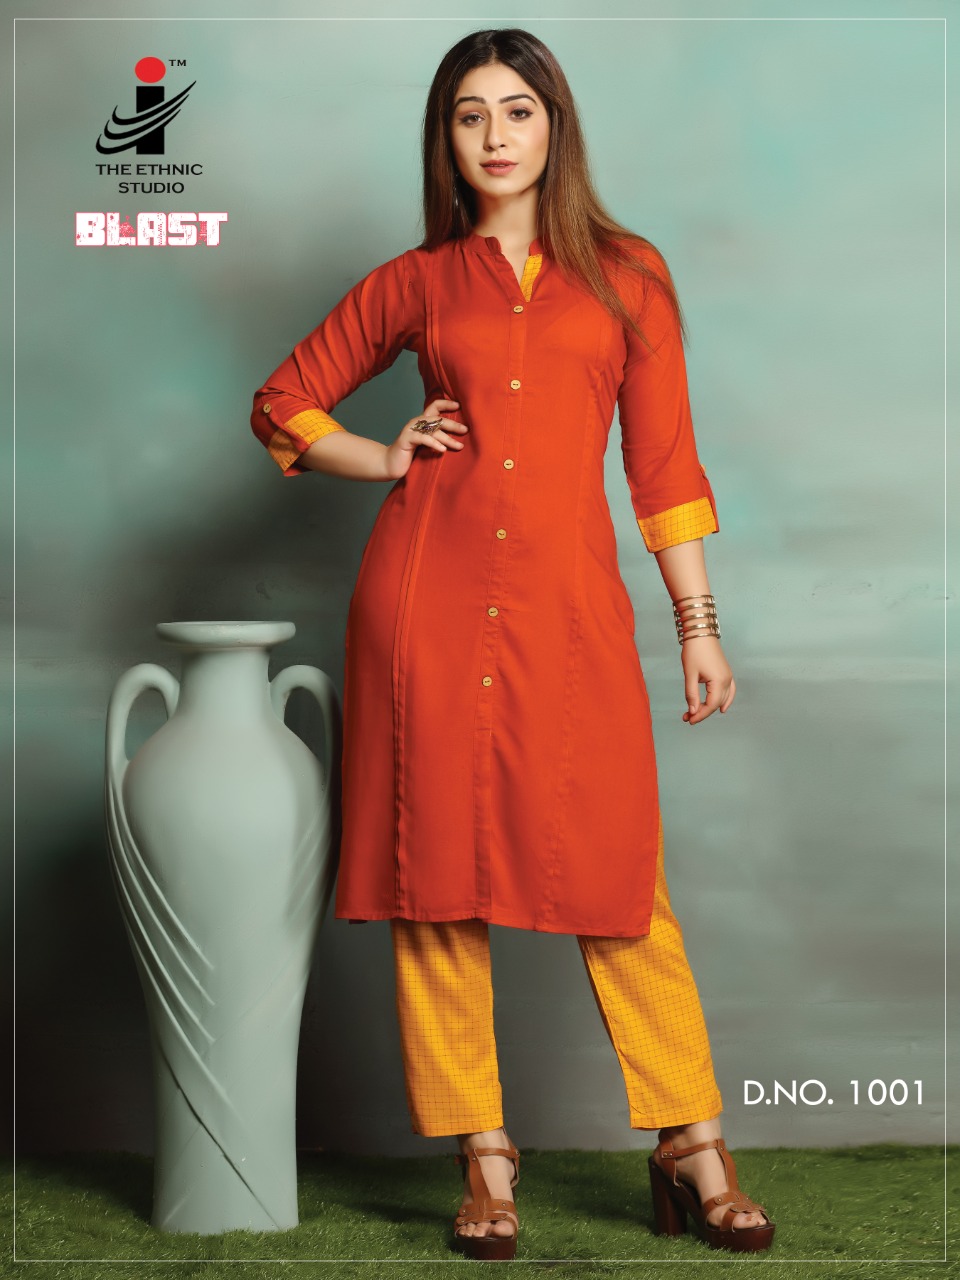 The Ethnic Studio blast attractive and stylish classy catchy look Kurties in wholesale